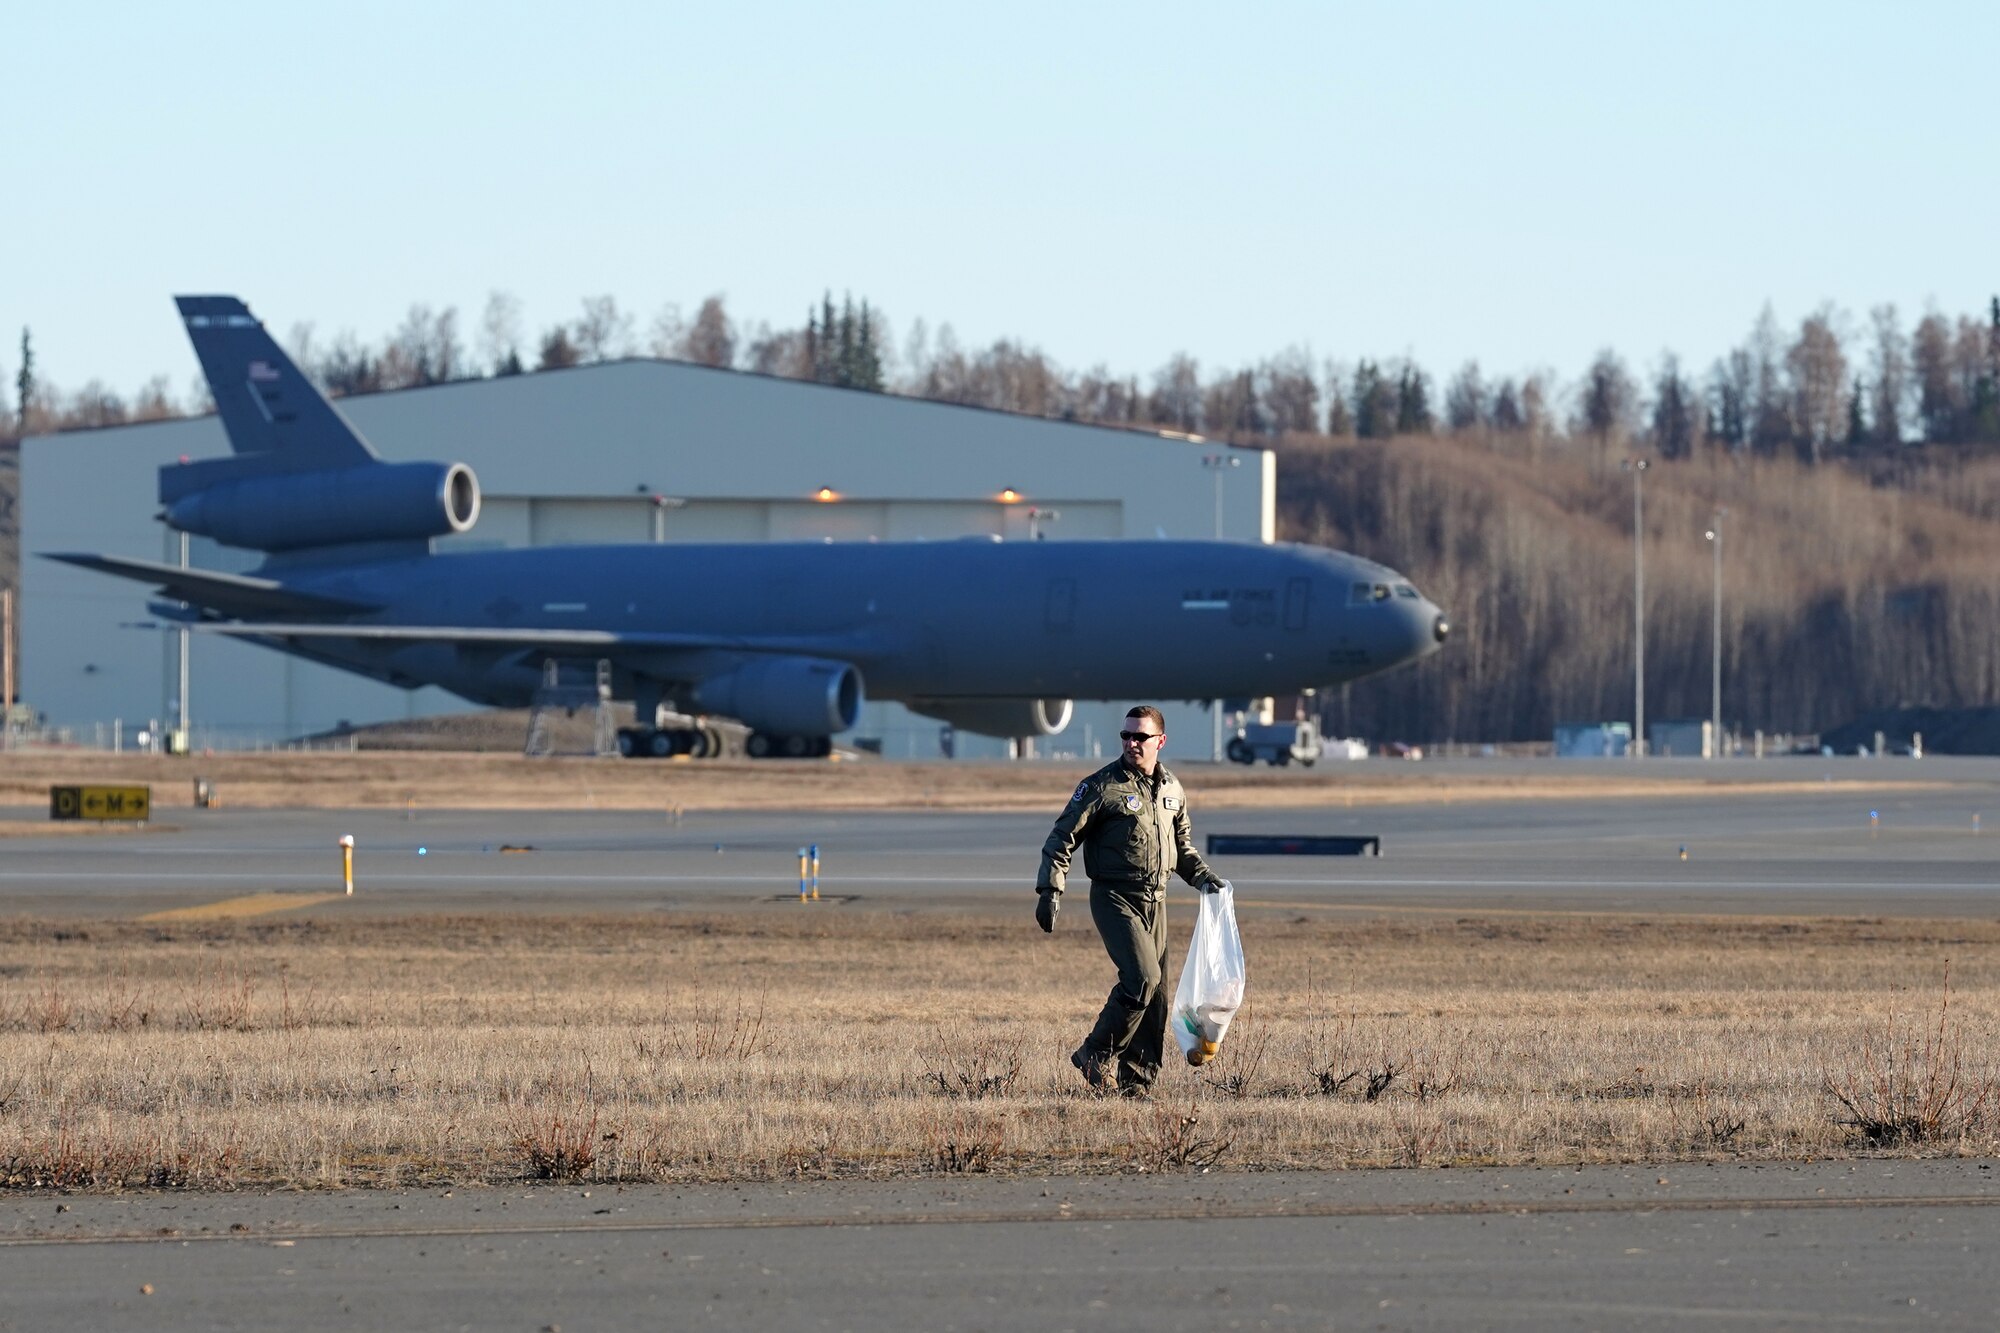 U.S. Airmen from the 3rd Wing, 176th Wing, and 477th Fighter Group conduct a foreign object debris walk on the flightline at Joint Base Elmendorf-Richardson, Alaska, April 26, 2019. The Airmen conducted the FOD walk to remove debris that could damage aircraft and hinder mission readiness.